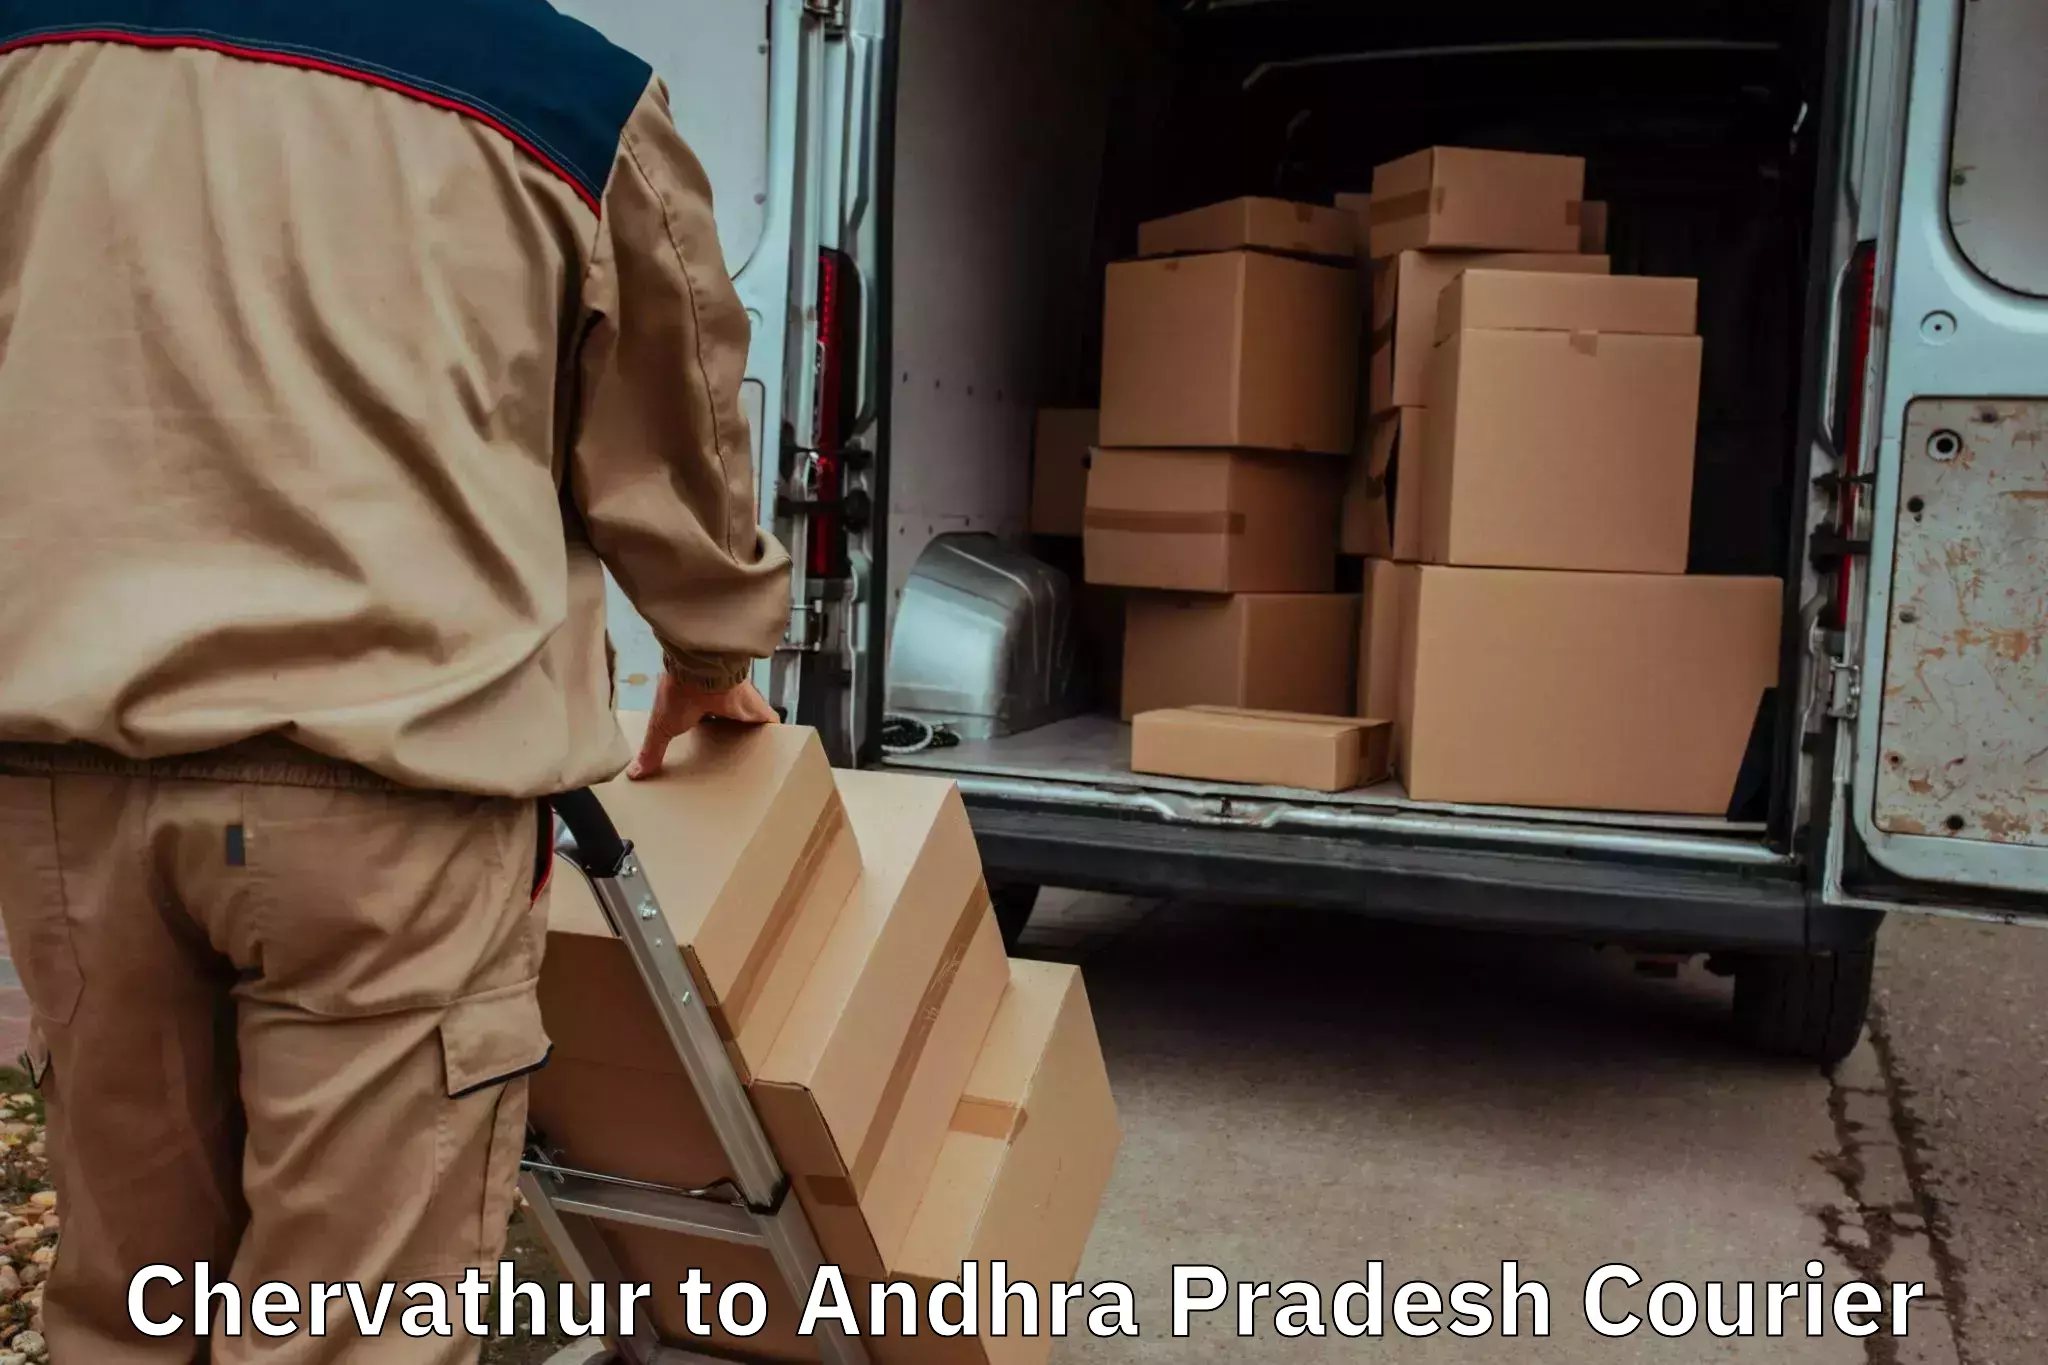 Furniture transport experts Chervathur to Chirala